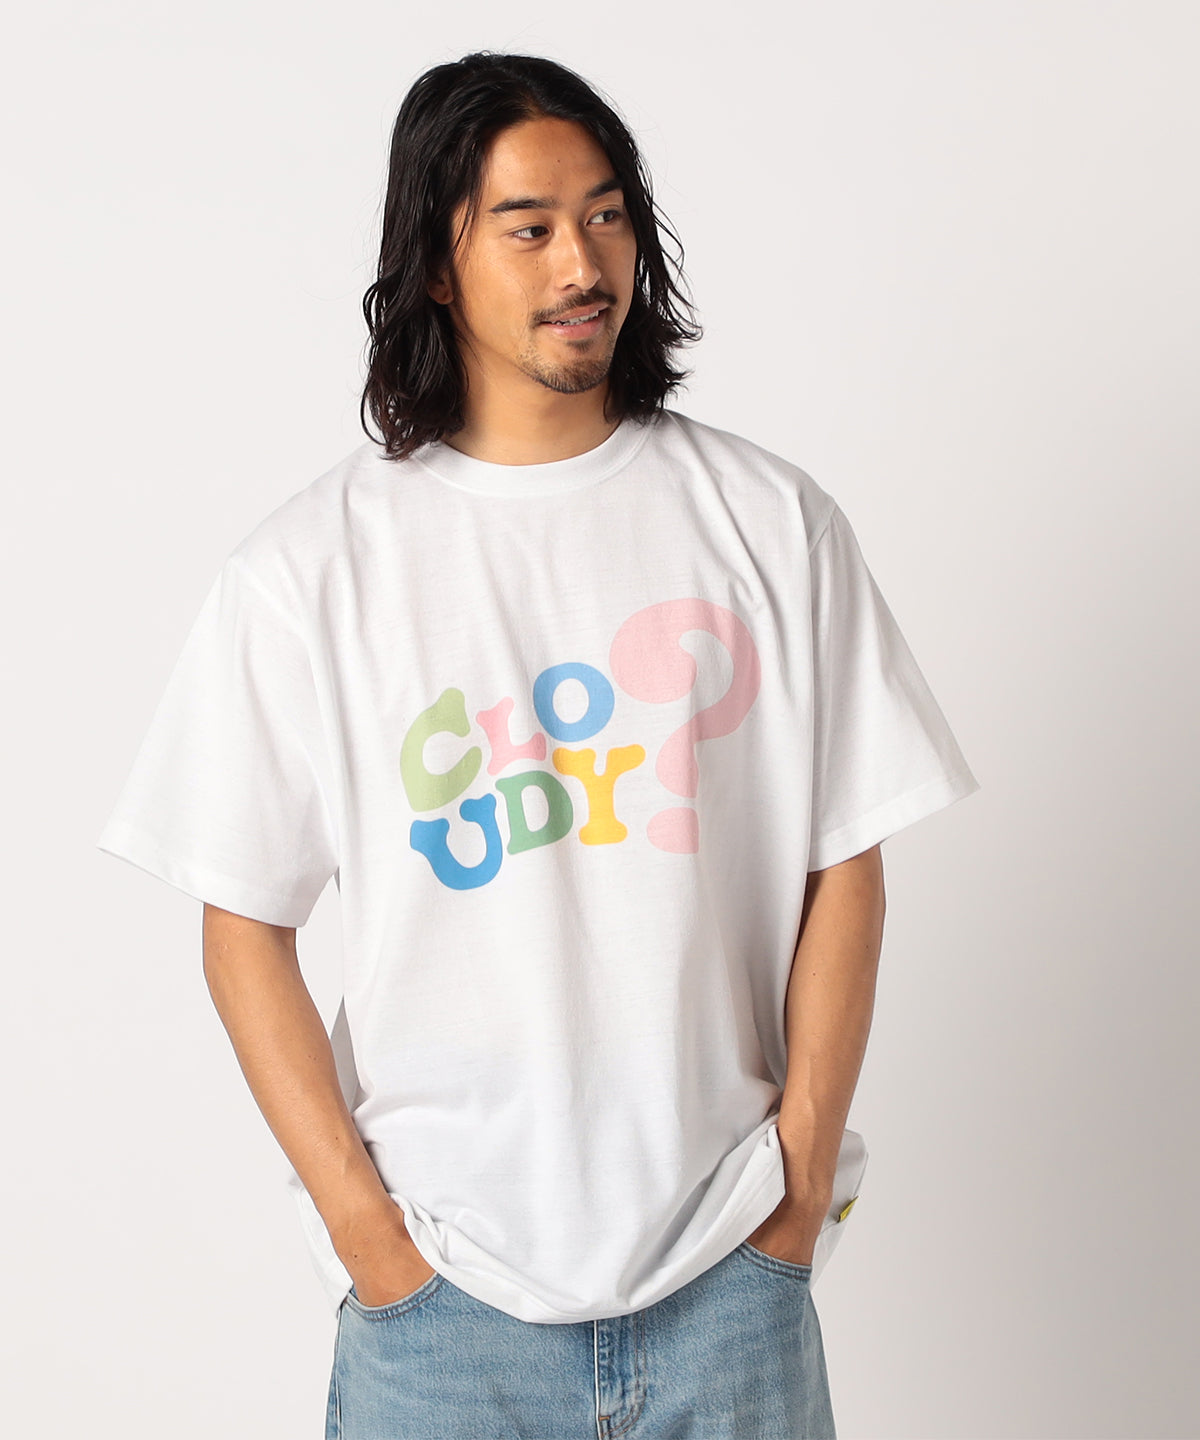 T-Shirt Collection｜CLOUDY公式通販サイト